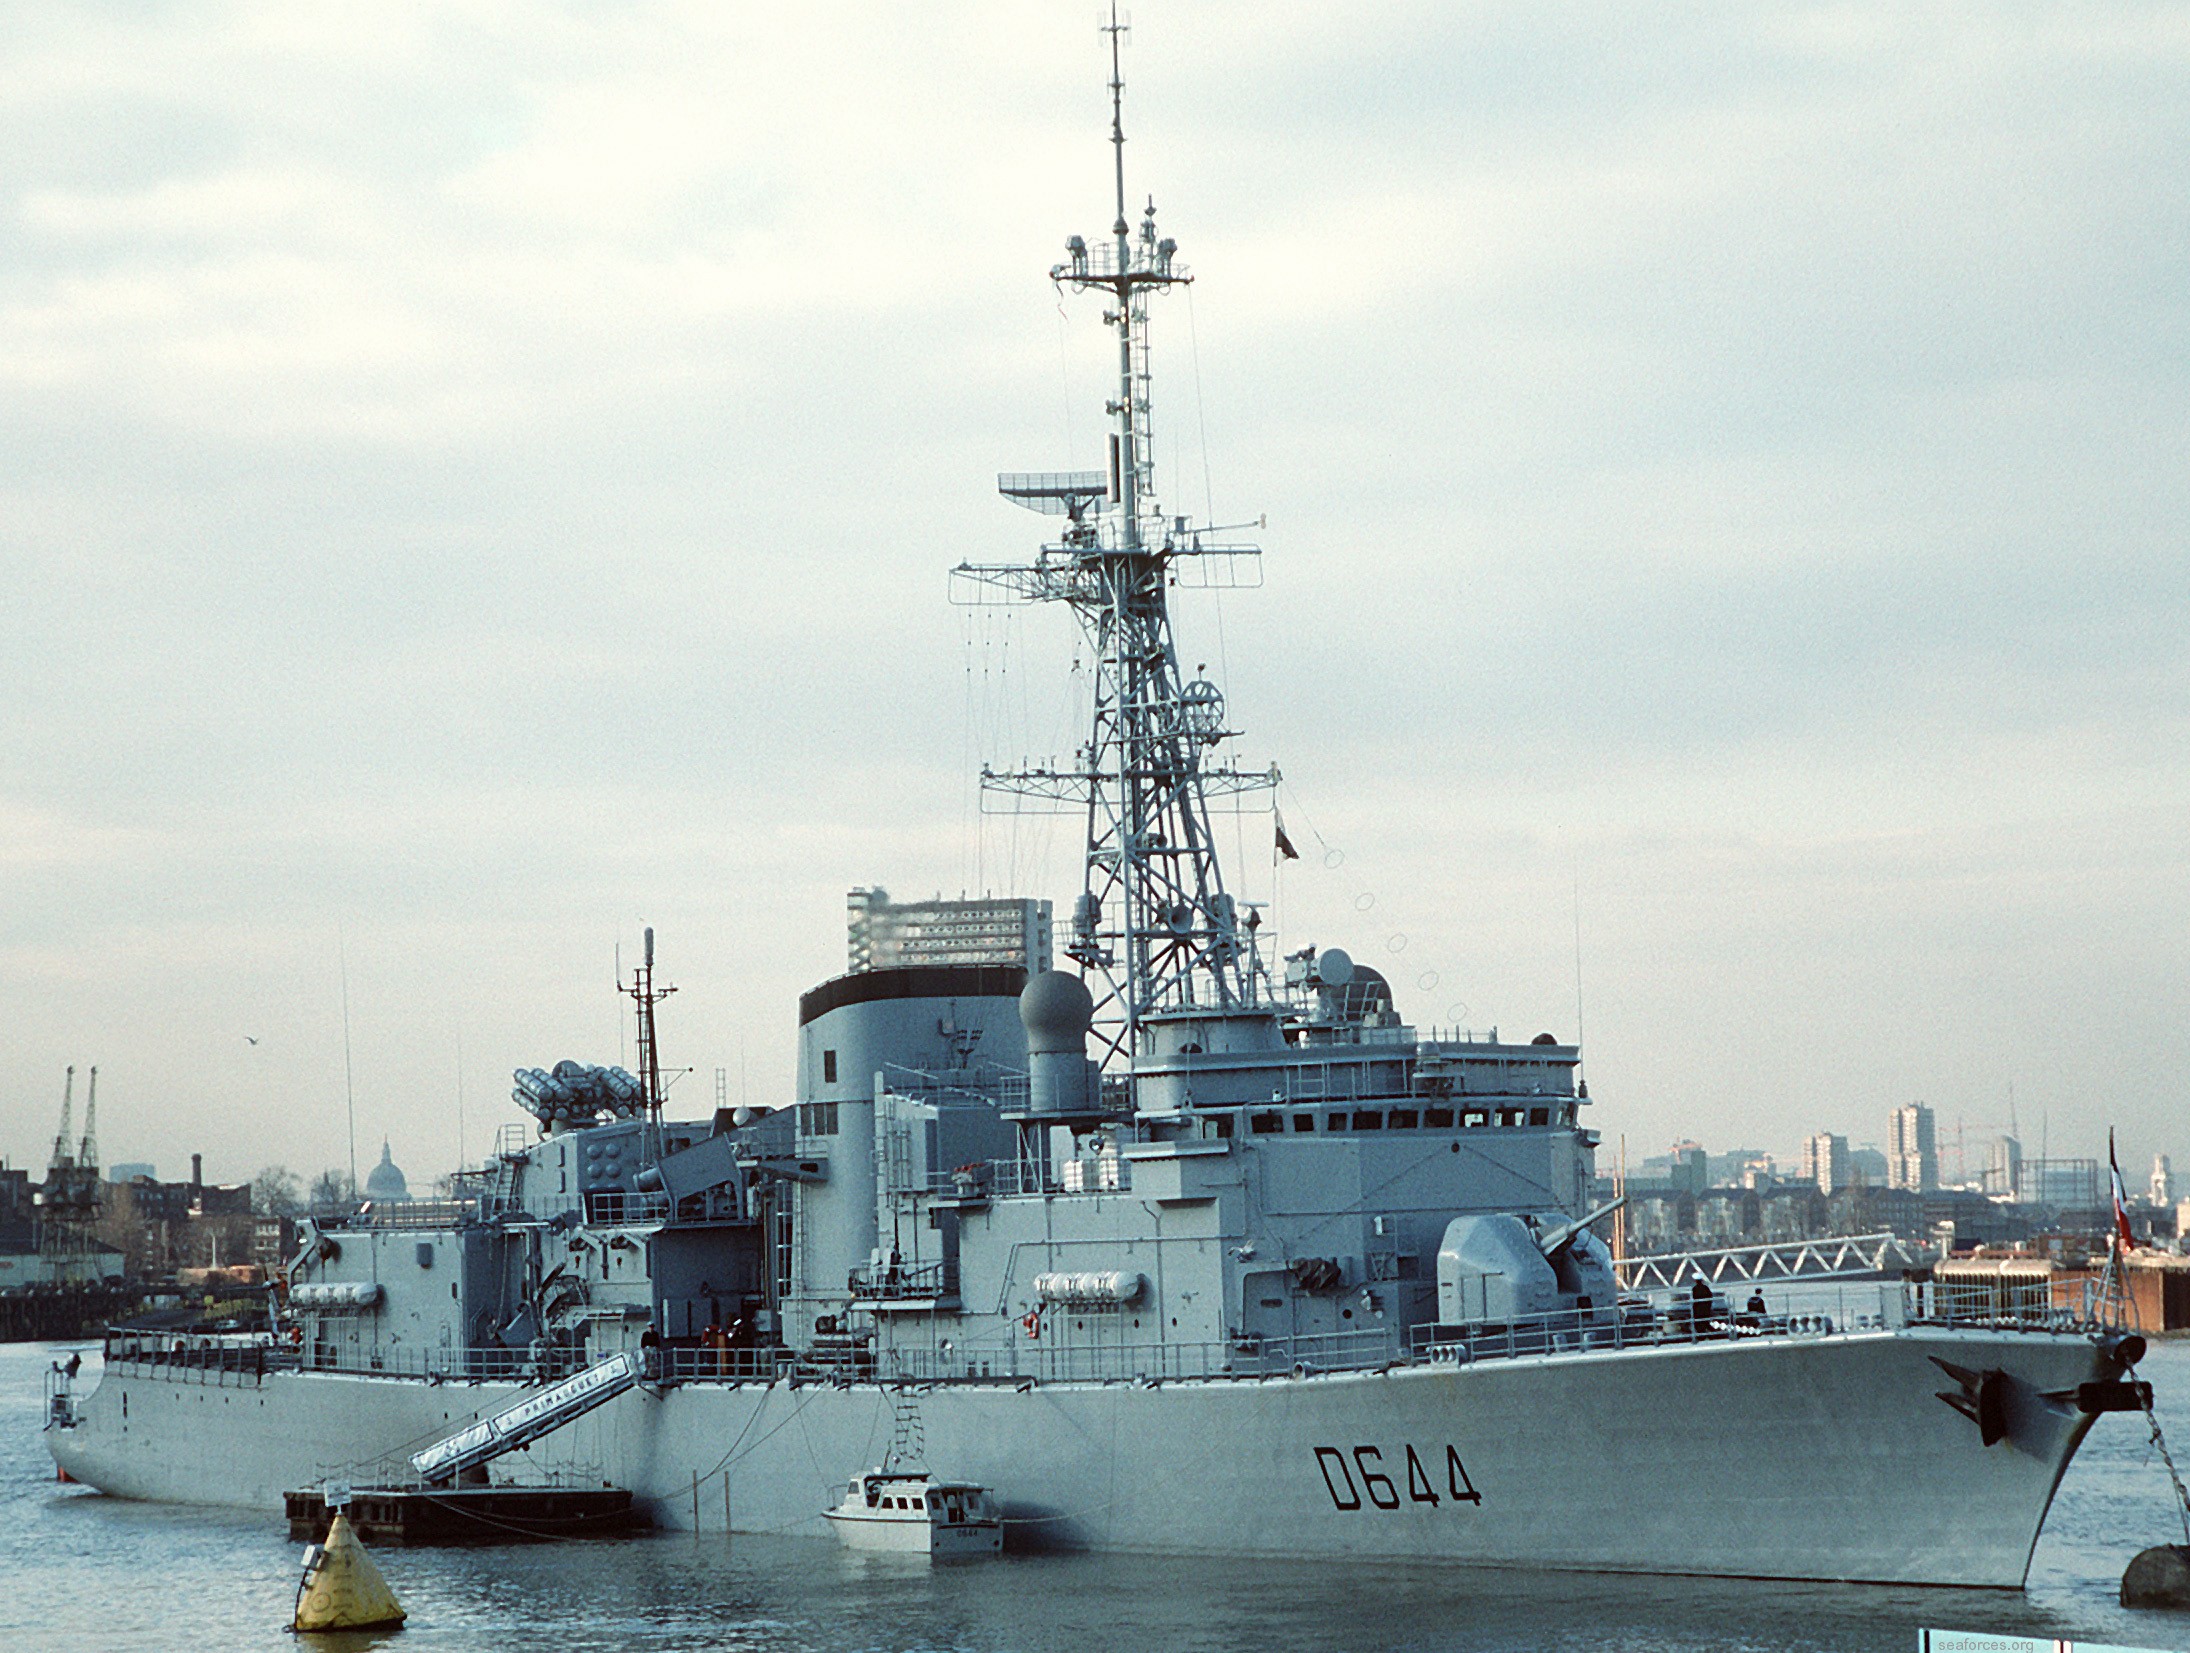 d-644 fs primauguet frigate destroyer asw type f70as leygues class french navy marine nationale 06